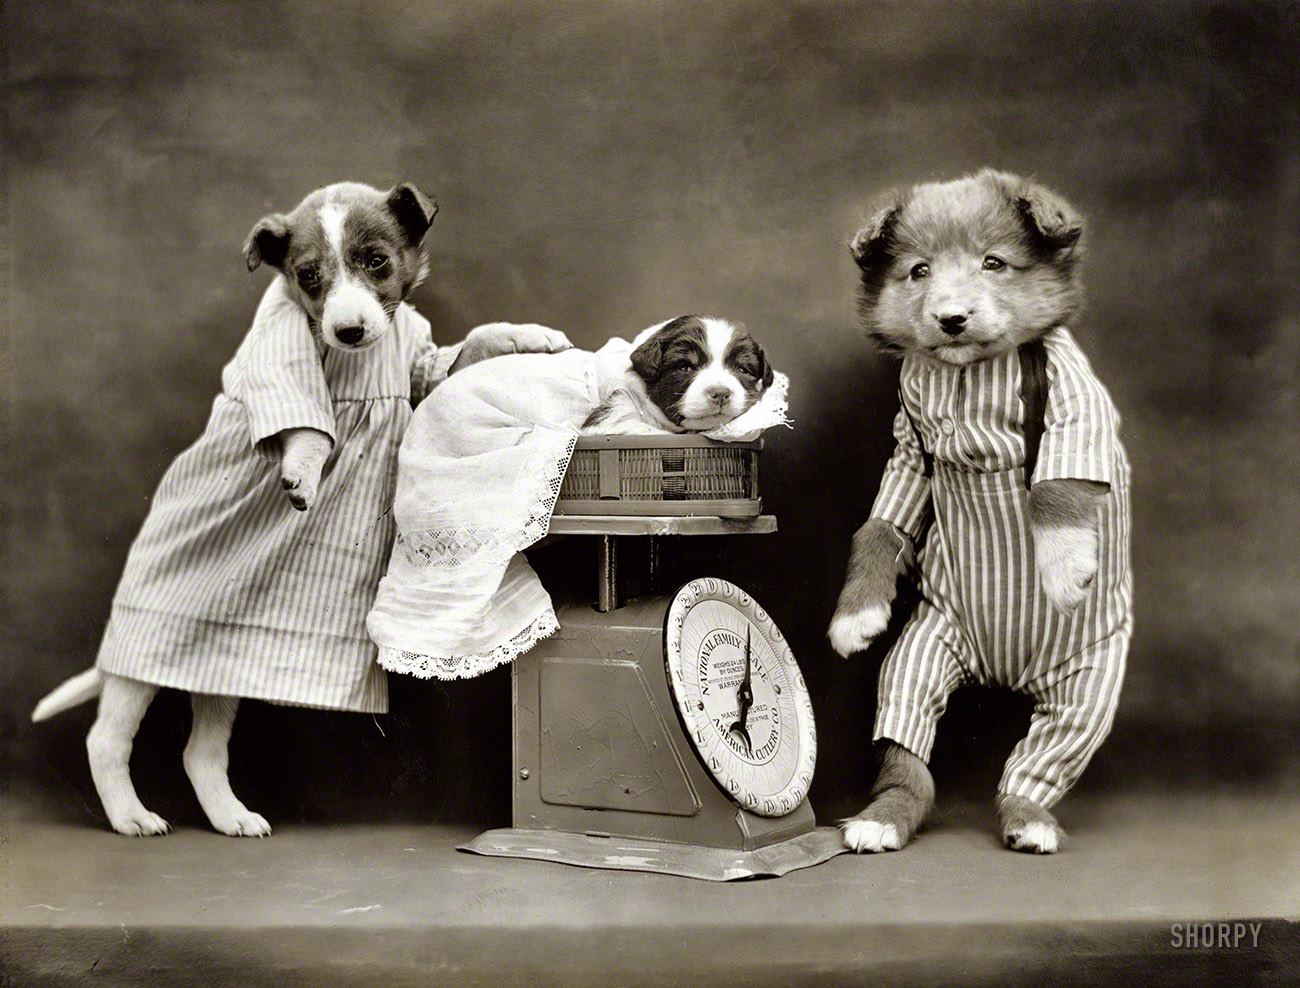 1914. "Dogs in costume weighing 'baby' puppy on scale." The kittens are taking a break this week. Photo by Harry W. Frees. View full size.